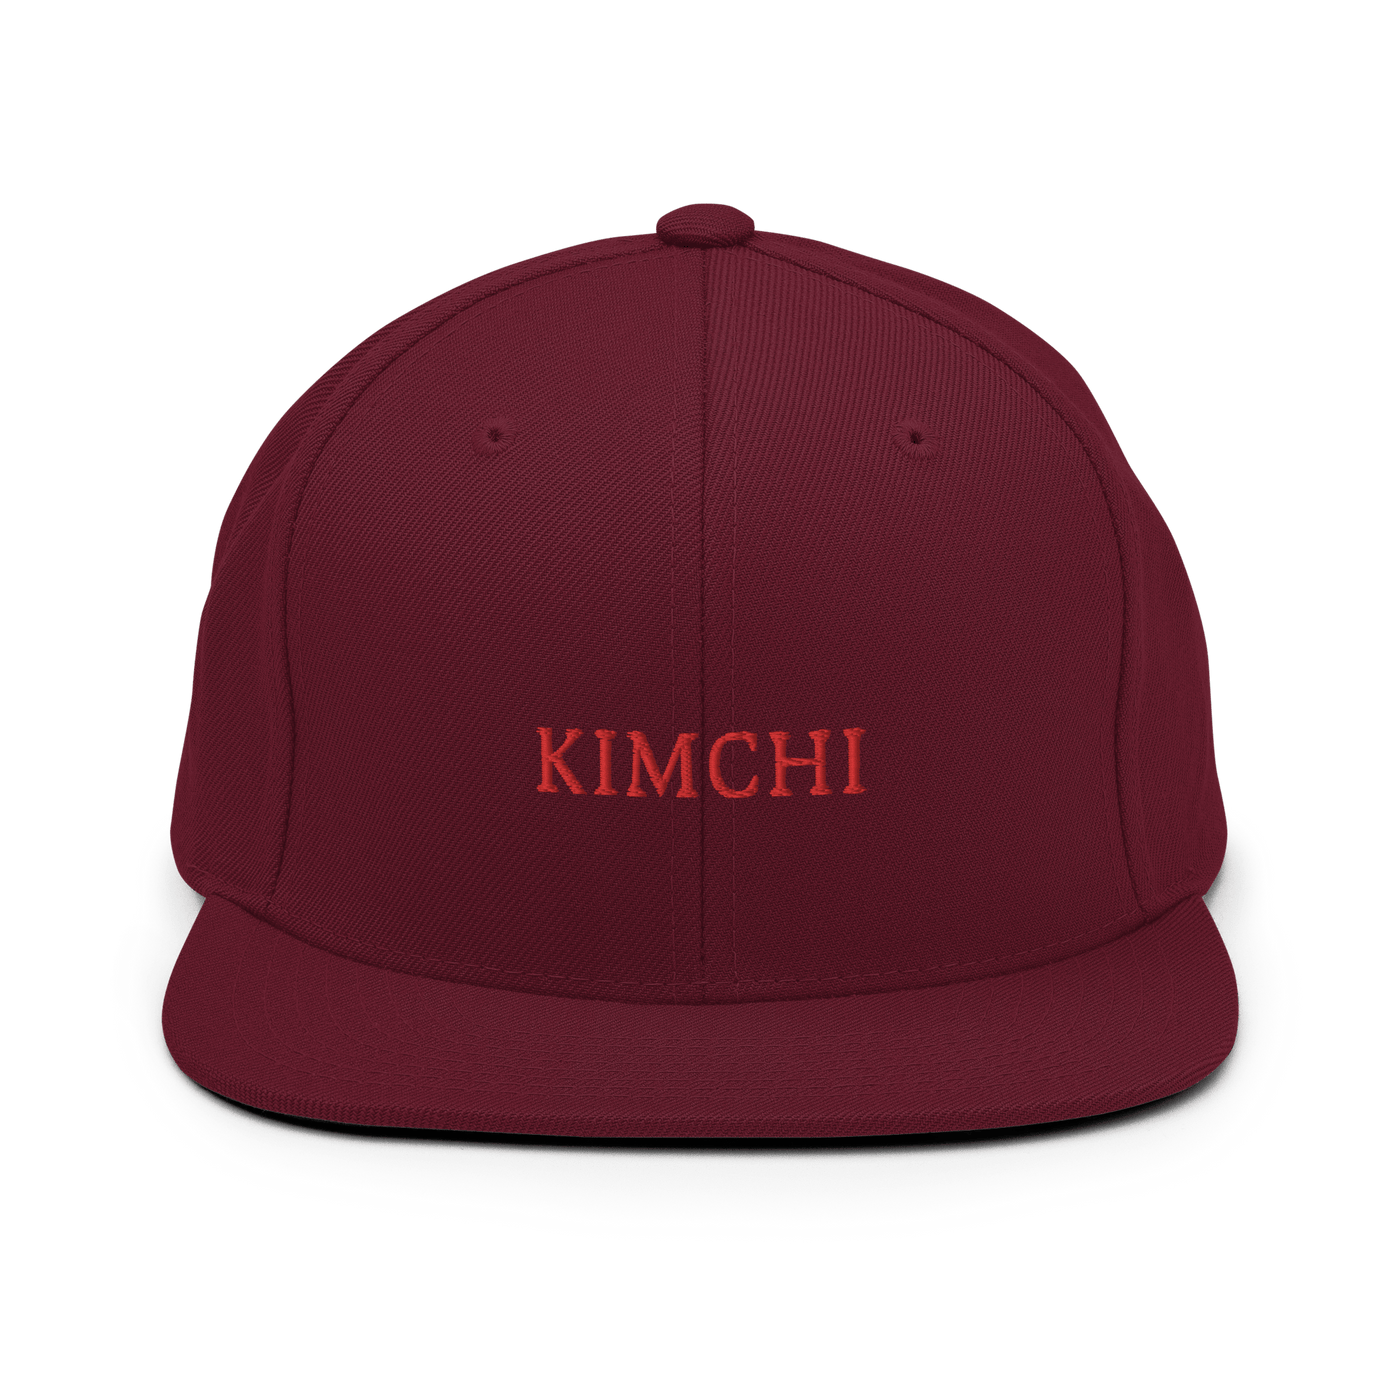 Kimchi Snapback Hat - Maroon - - Just Another Cap Store